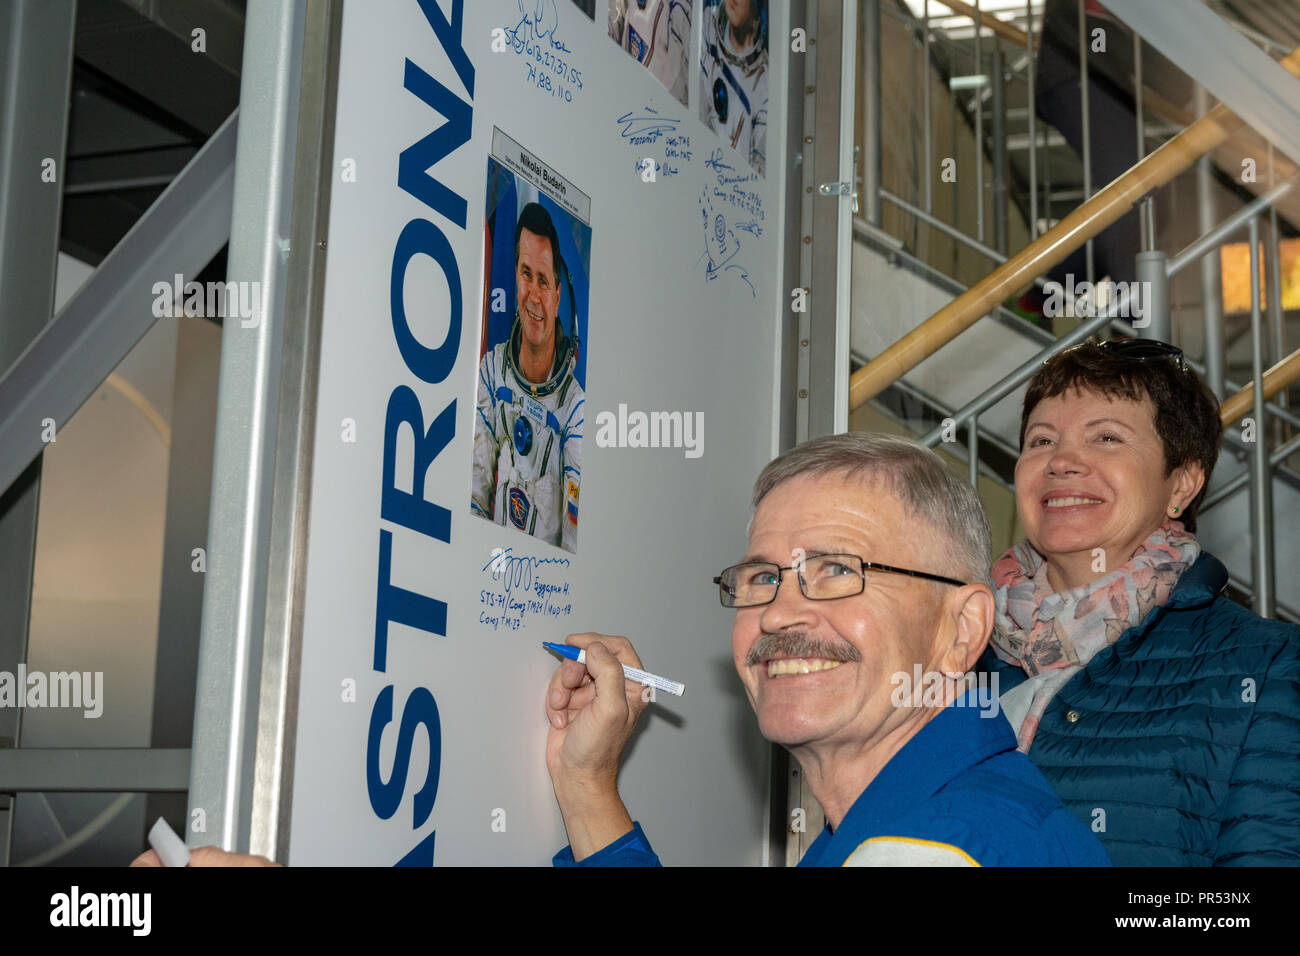 Speyer, Germany. 29th Sept 2018.  Cosmonaut Nikolai Budarin signing his exhibit during his visit at Technik Museum Speyer, Germany. With his wife (right) Credit: Markus Wissmann/Alamy Live News Stock Photo